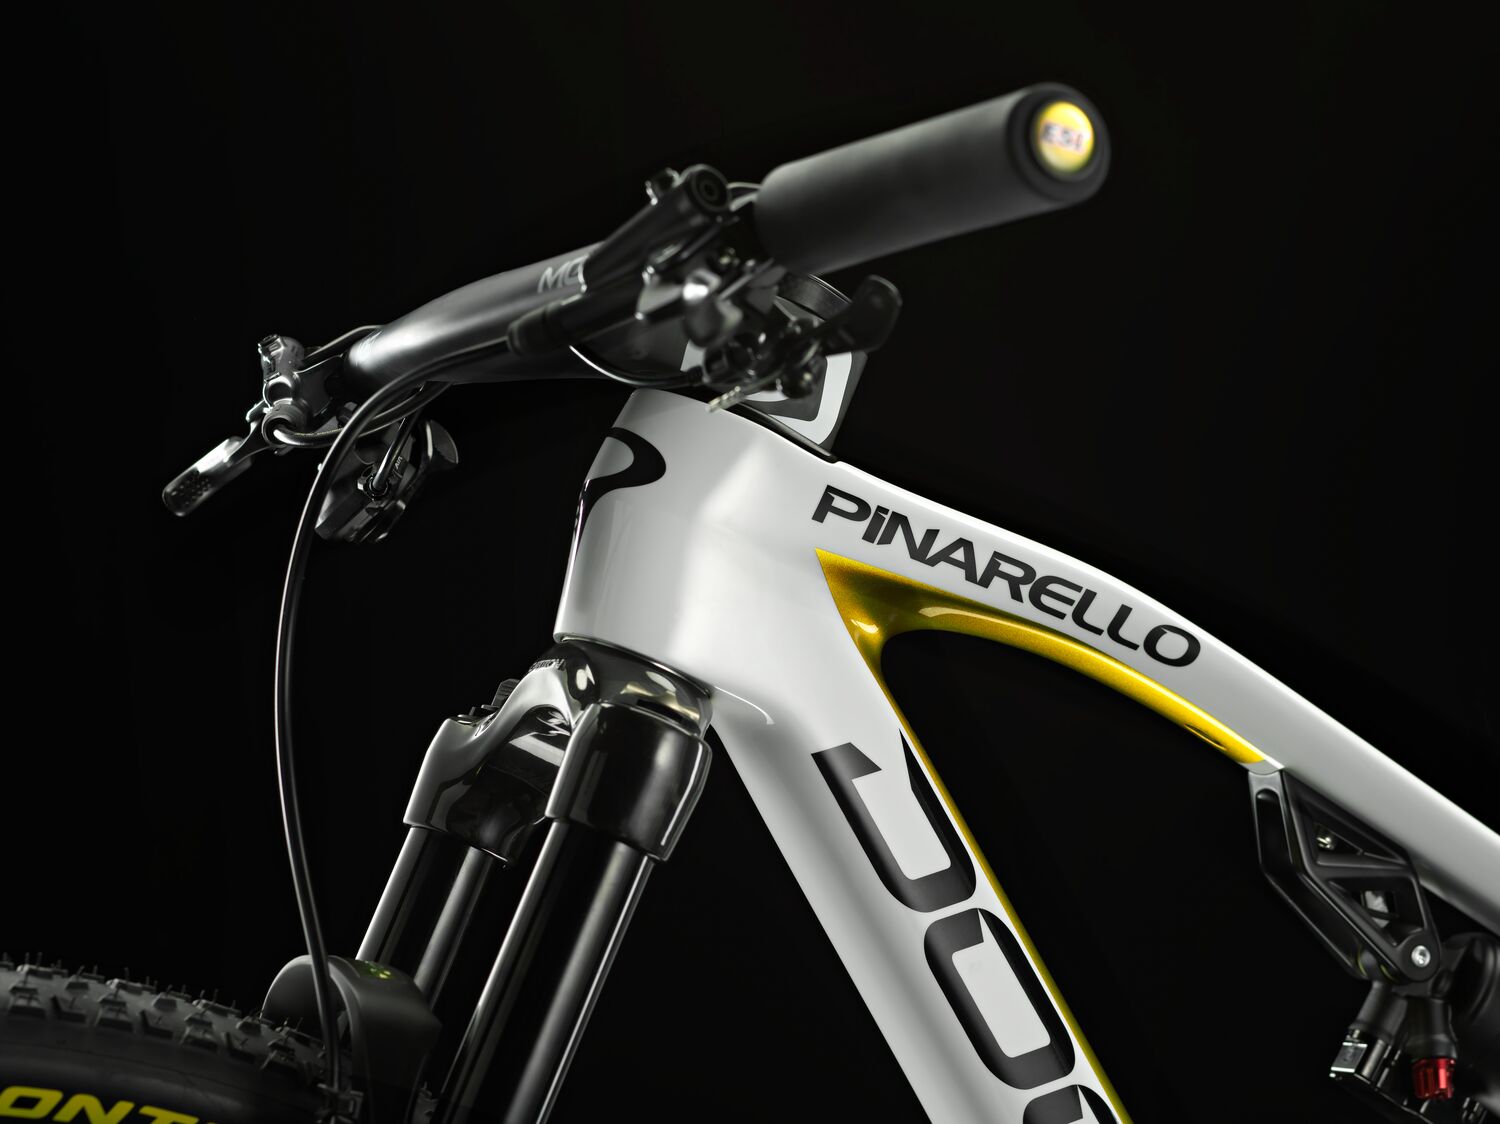 Pinarello officially launches Dogma XC with patent-pending rear